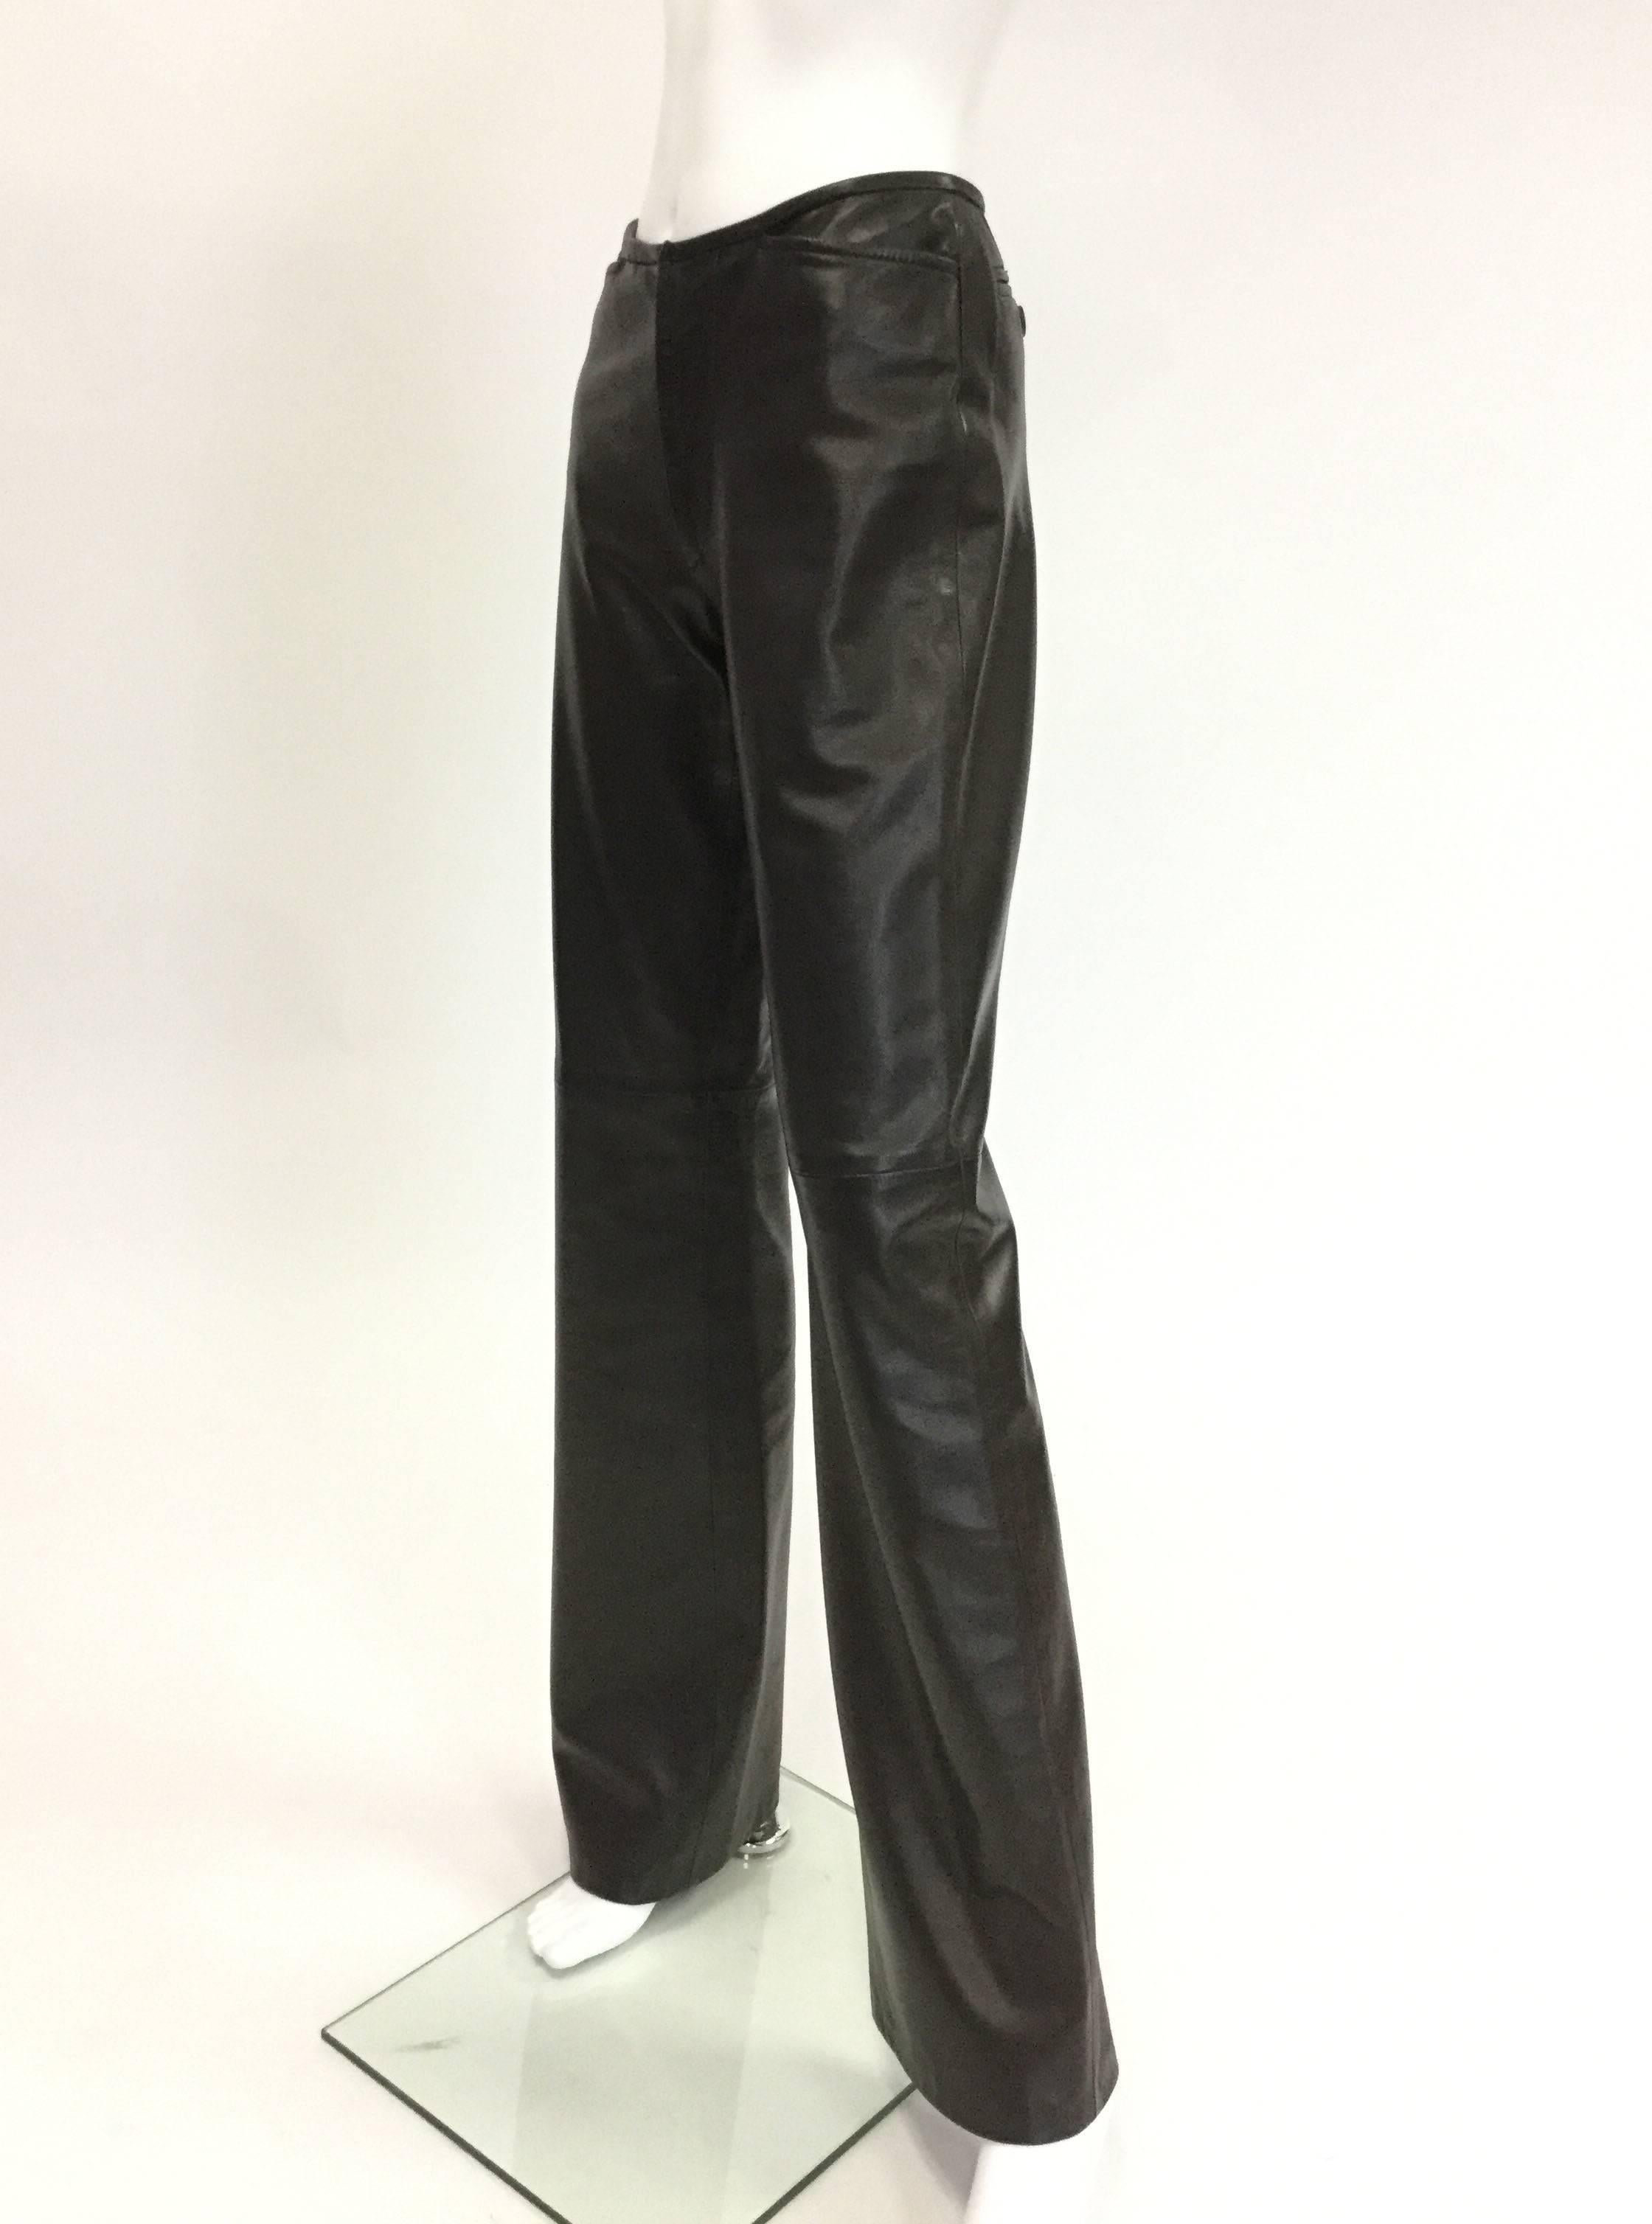 
These gorgeous leather trousers by Gucci are so sexy and fit like a dream! The espresso brown leather hugs the wearer's hips, stays fitted down the thigh, and finally flares delicately outward at the knees. They are incredibly soft -- 